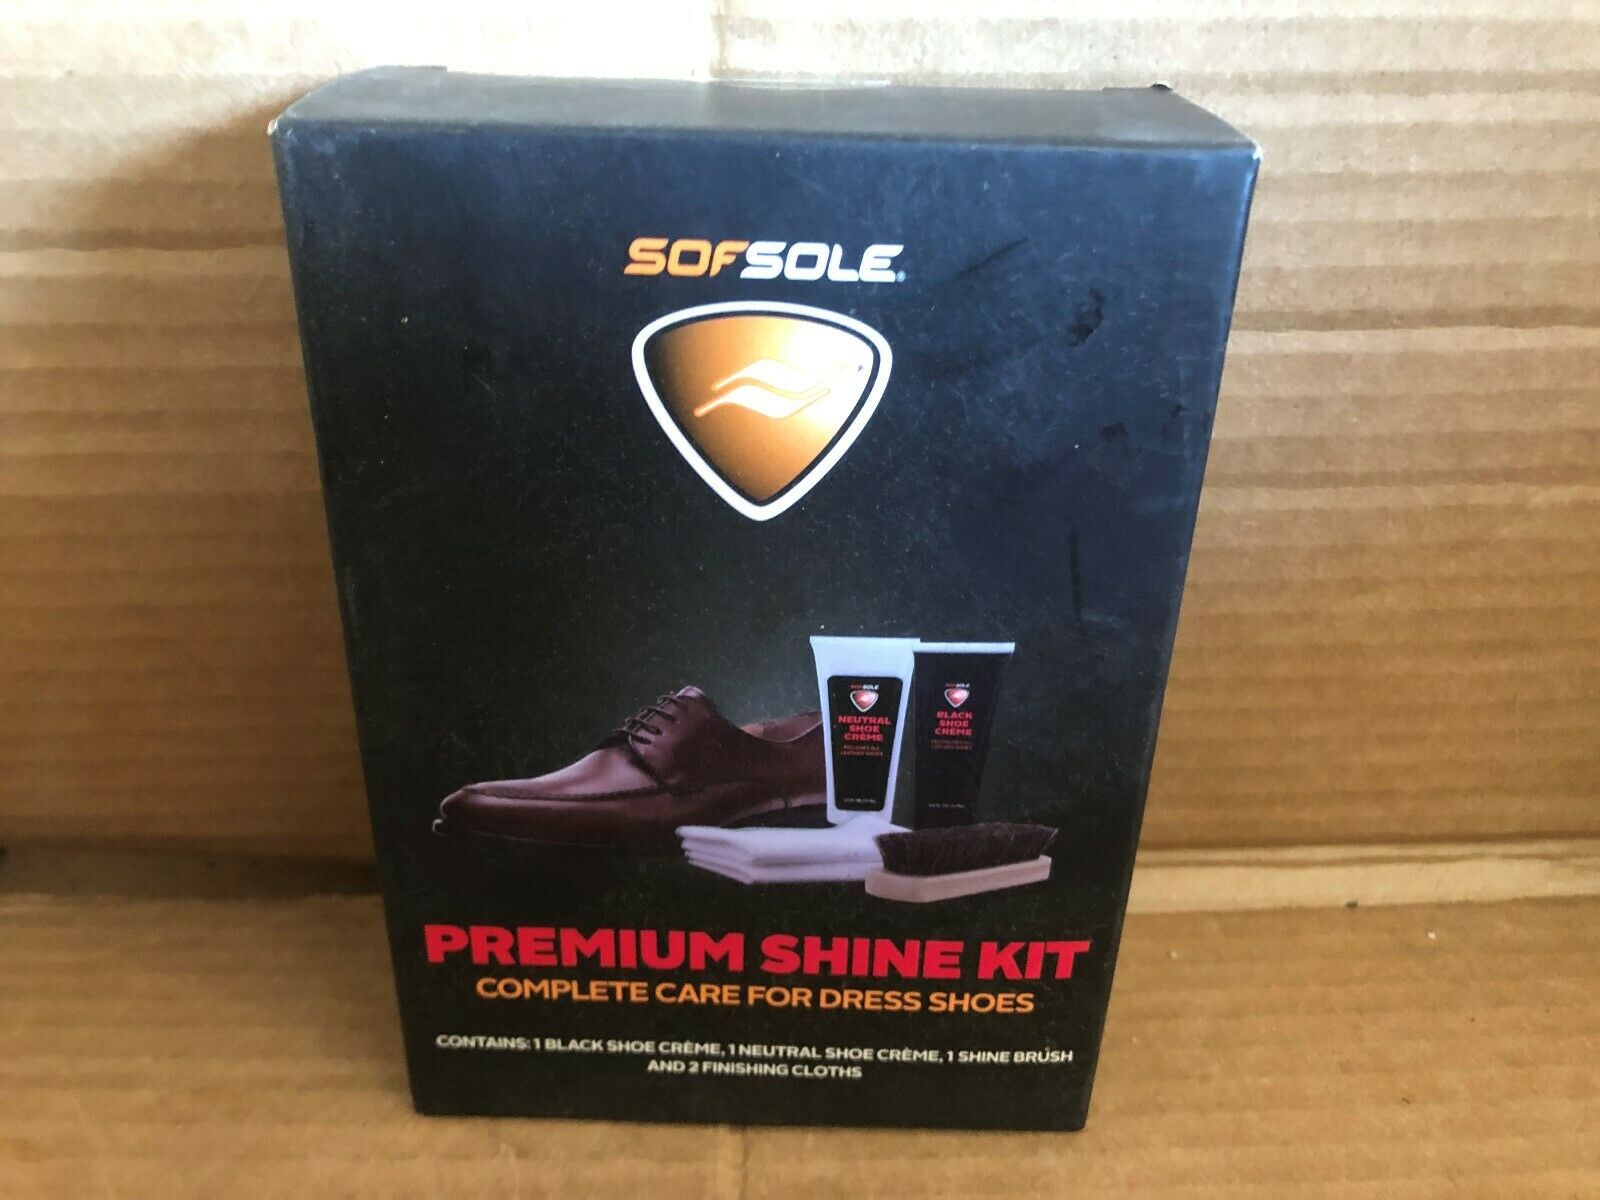 NEW SOFSOLE PREMIUM SHINE KIT COMPLETE CARE FOR DRESS SHOES